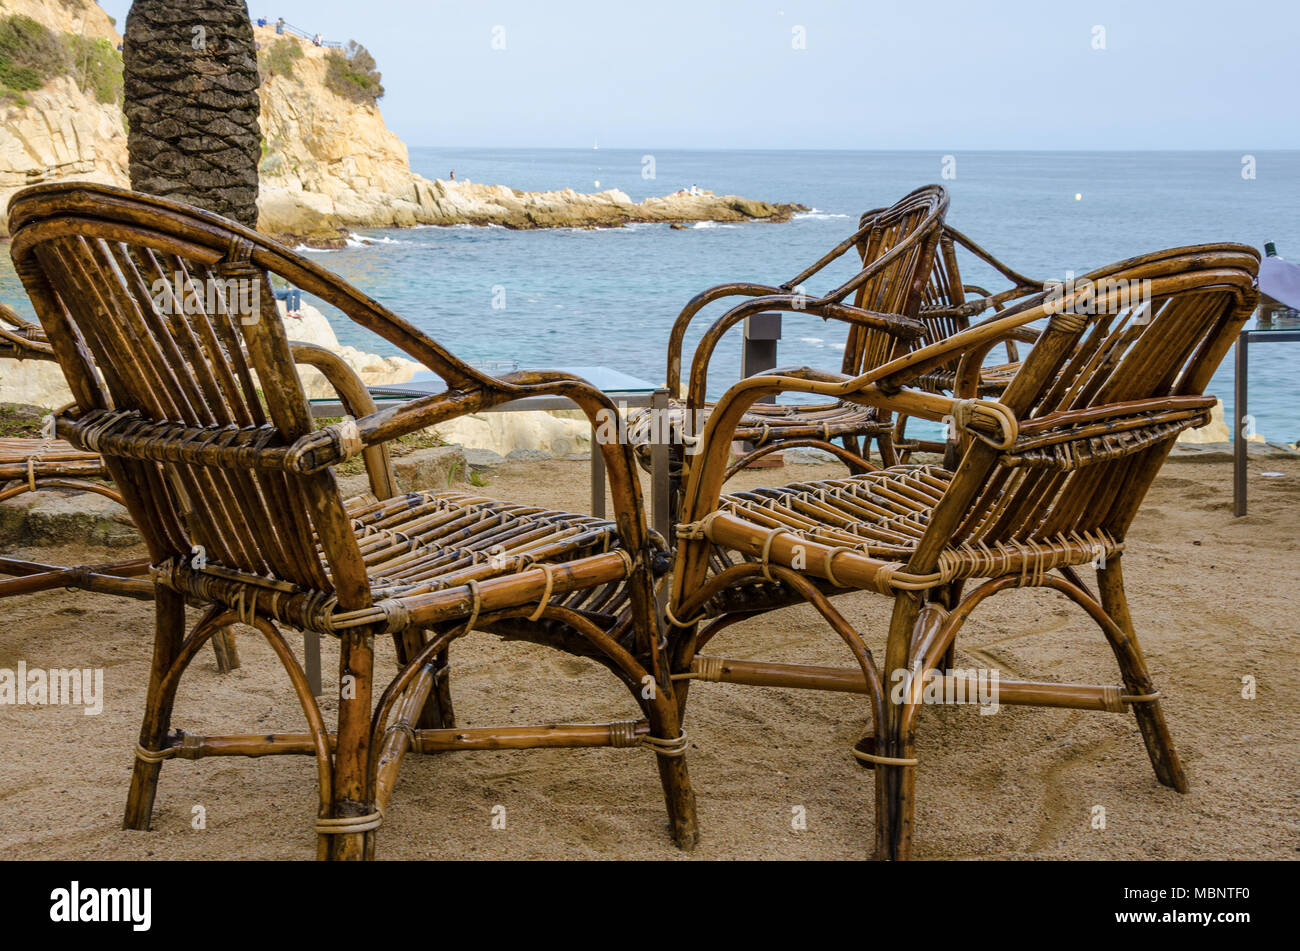 https://c8.alamy.com/comp/MBNTF0/bamboo-chairs-set-out-with-a-picturesque-view-of-the-sea-at-lloret-de-mar-in-the-costa-brava-region-of-spain-MBNTF0.jpg